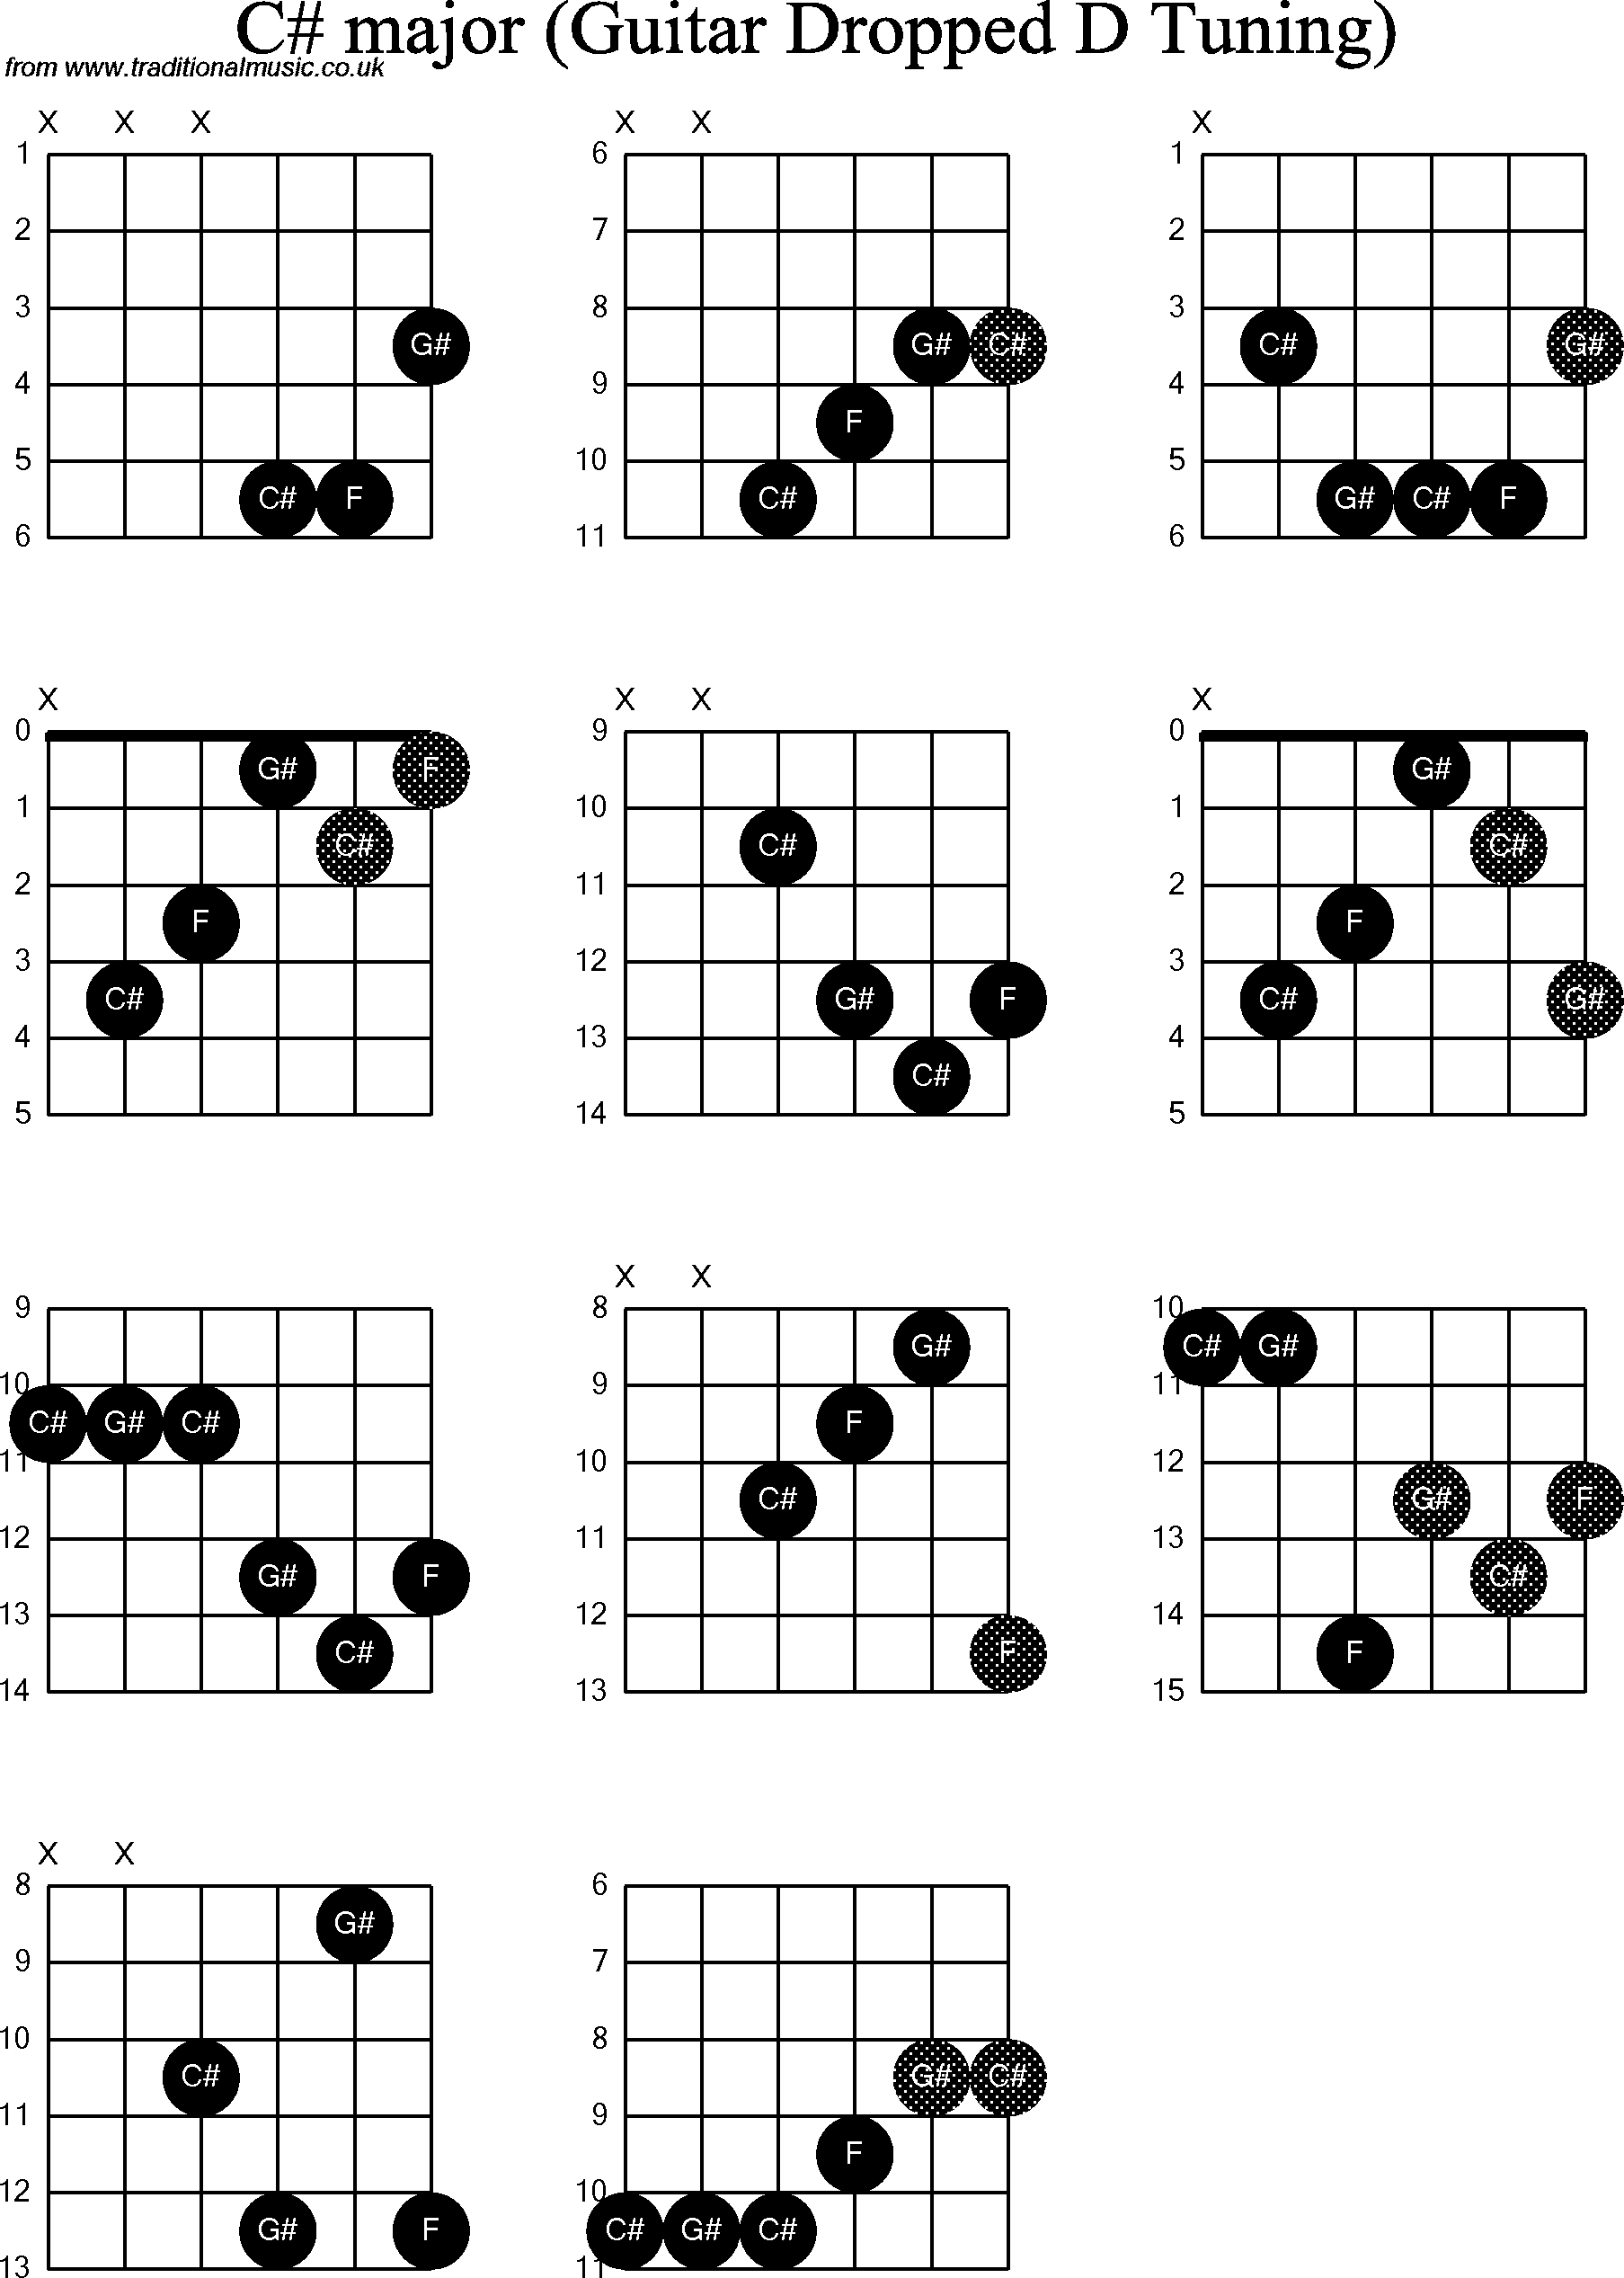 Chord Diagrams For Dropped D Guitar Dadgbe C Sharp